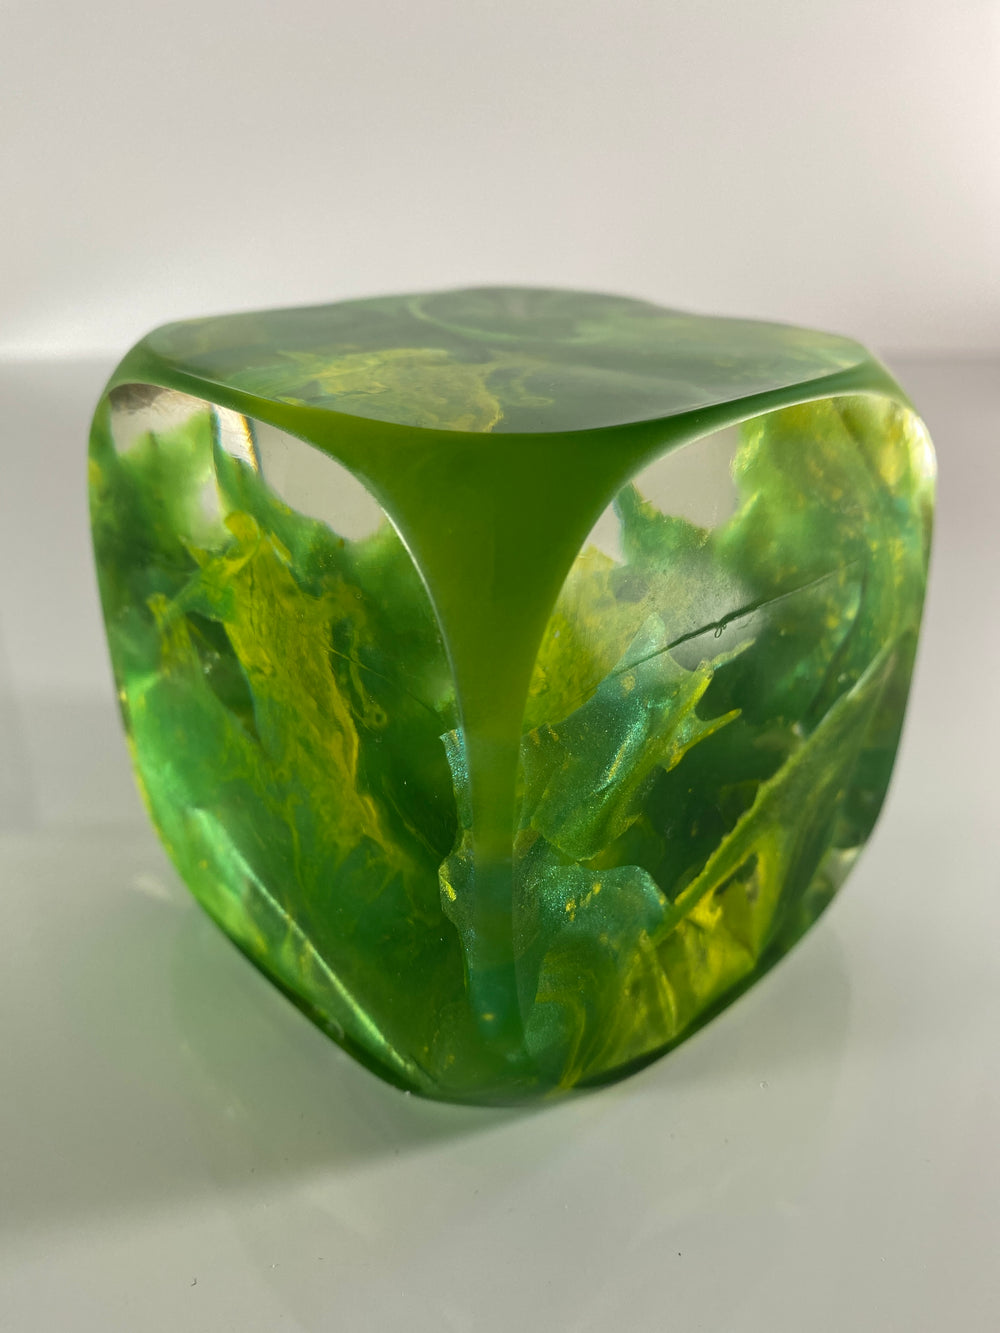 Klubo Pearlescent green and yellow 3x3